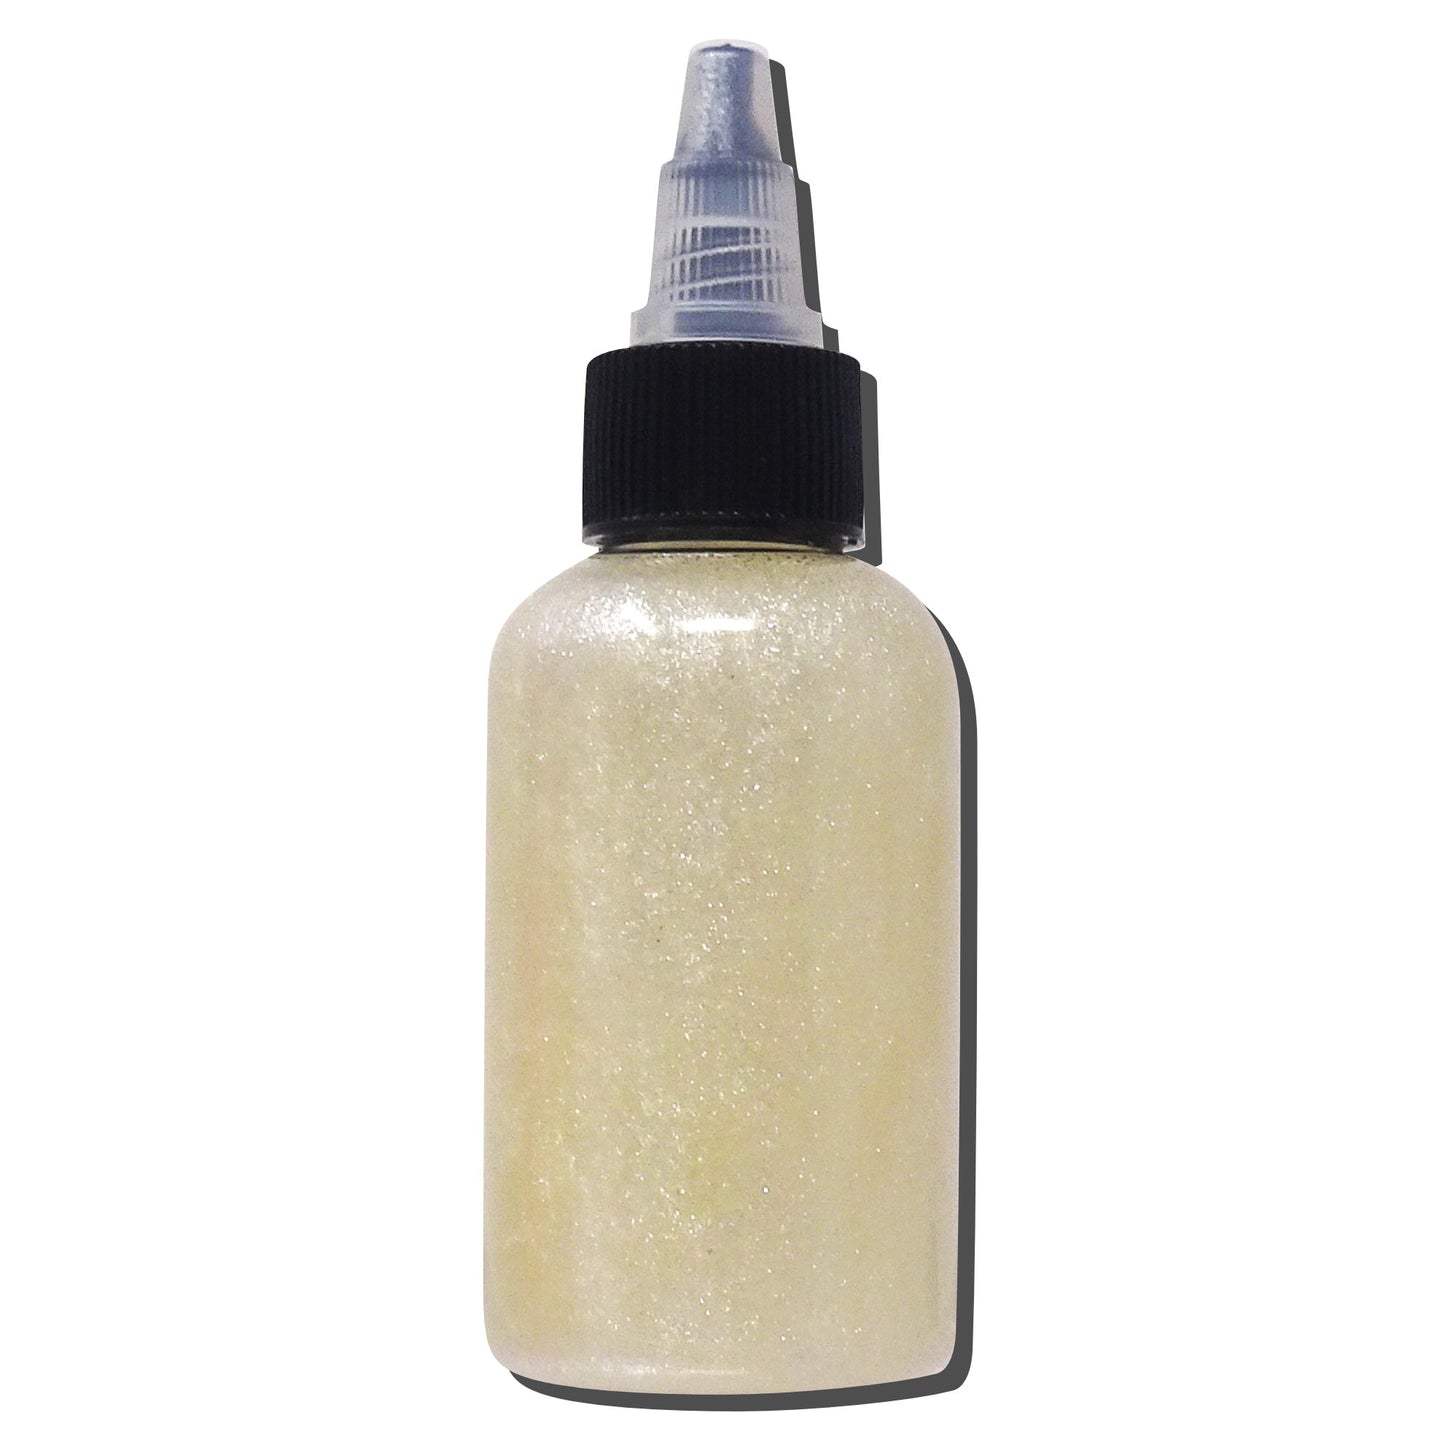 Cake Icing FLAVORED - Nourishing Booty n Body Shimmer Oil